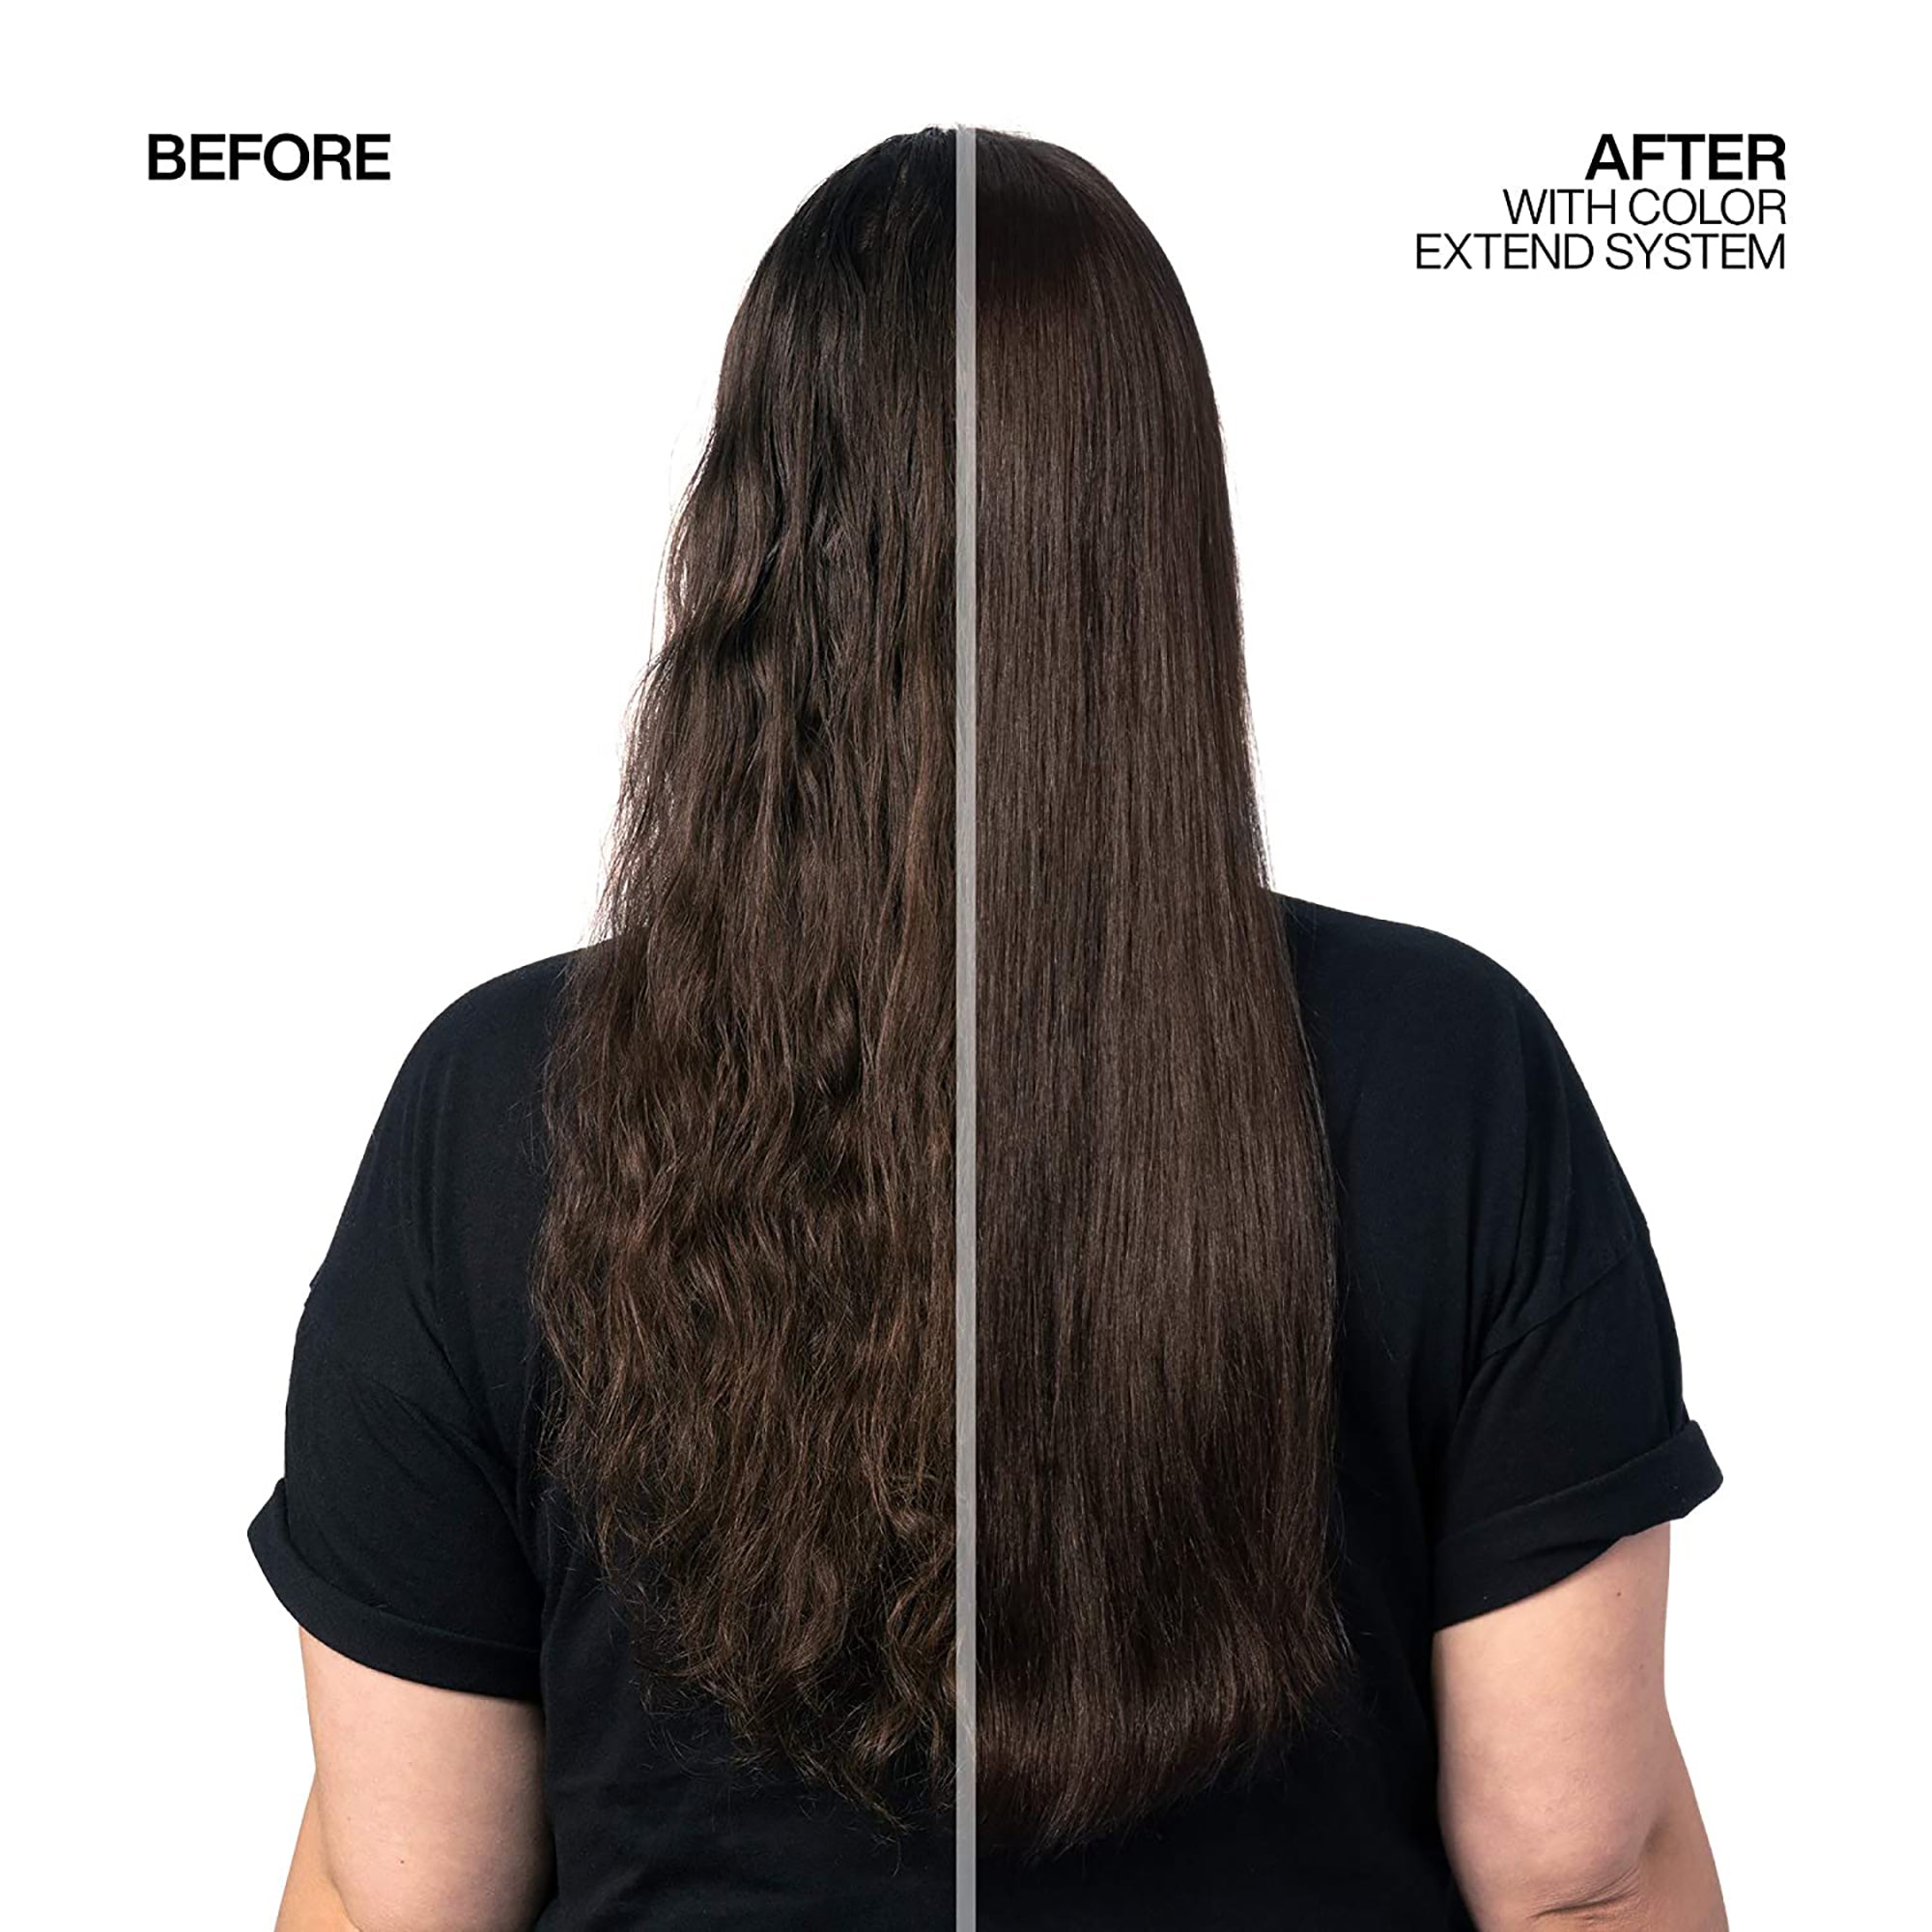 Redken Color Extend Shampoo and Conditioner Liter ($100 Value) / DUO